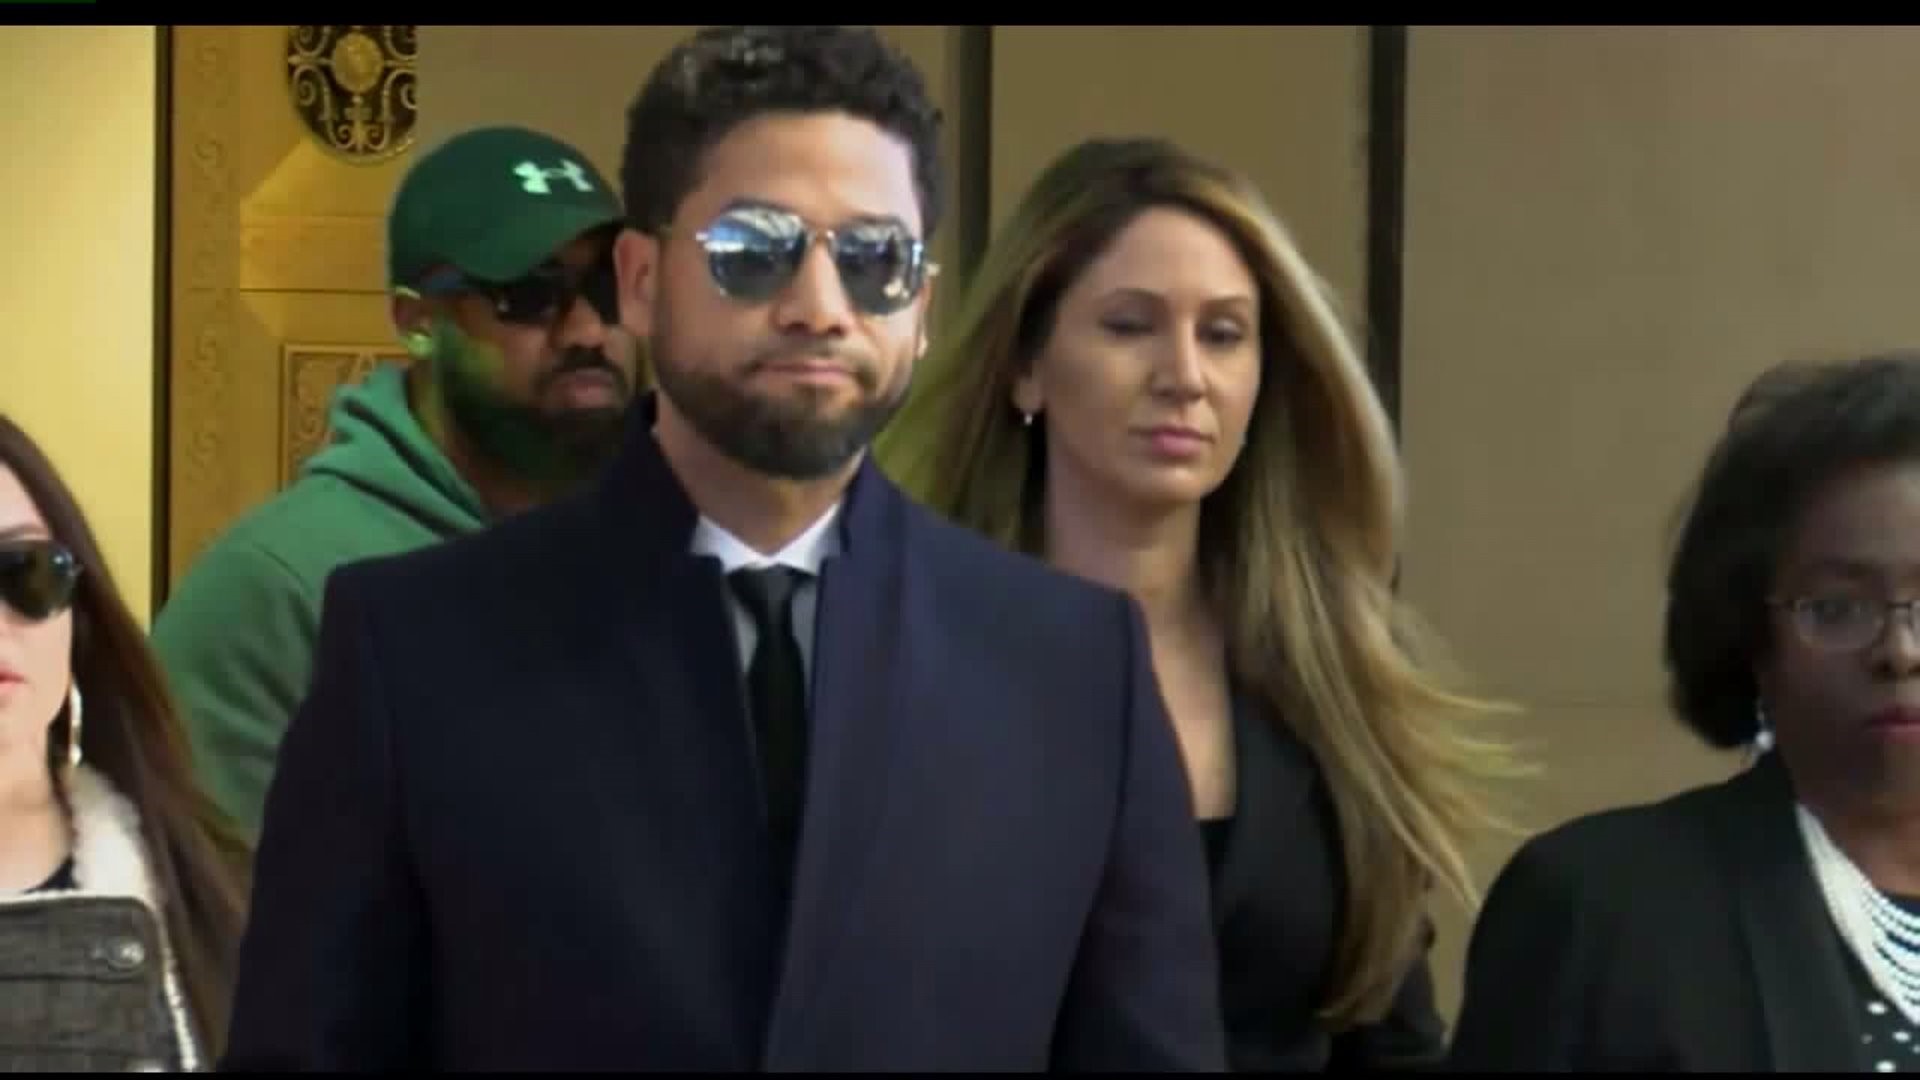 Reports on Smollett case released